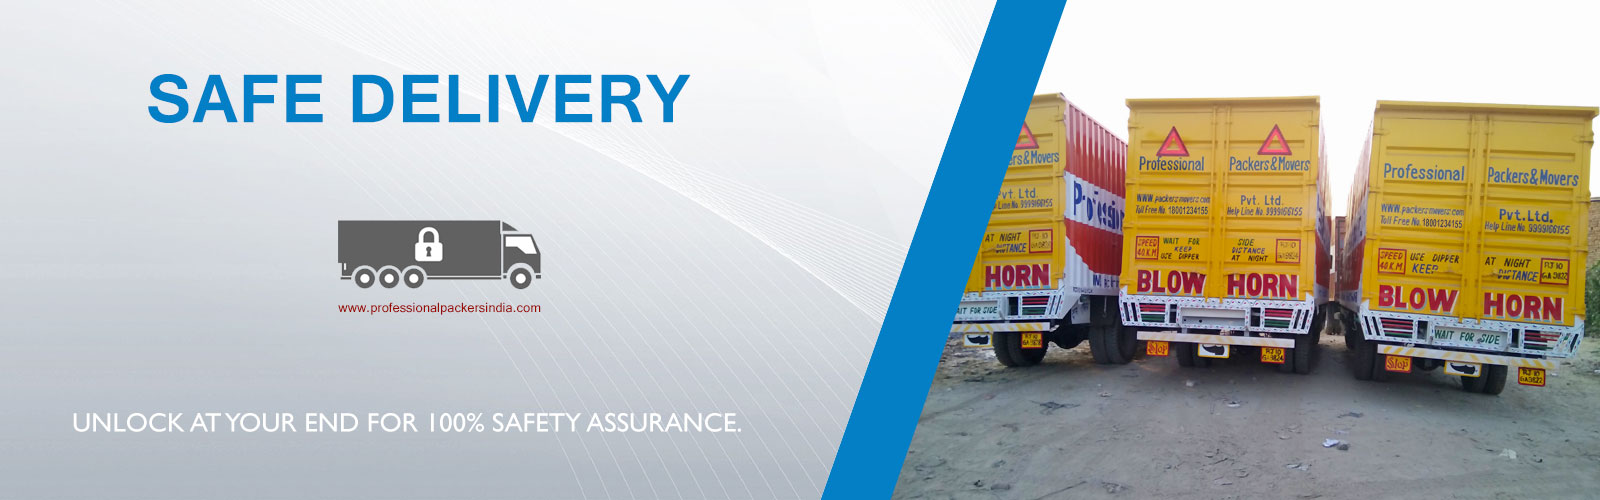 Movers Packers Mahavir Enclave Delhi company move your belongings fast and in an efficient manner by integrating top-notch packaging material, dedicated staff and global-class technology.